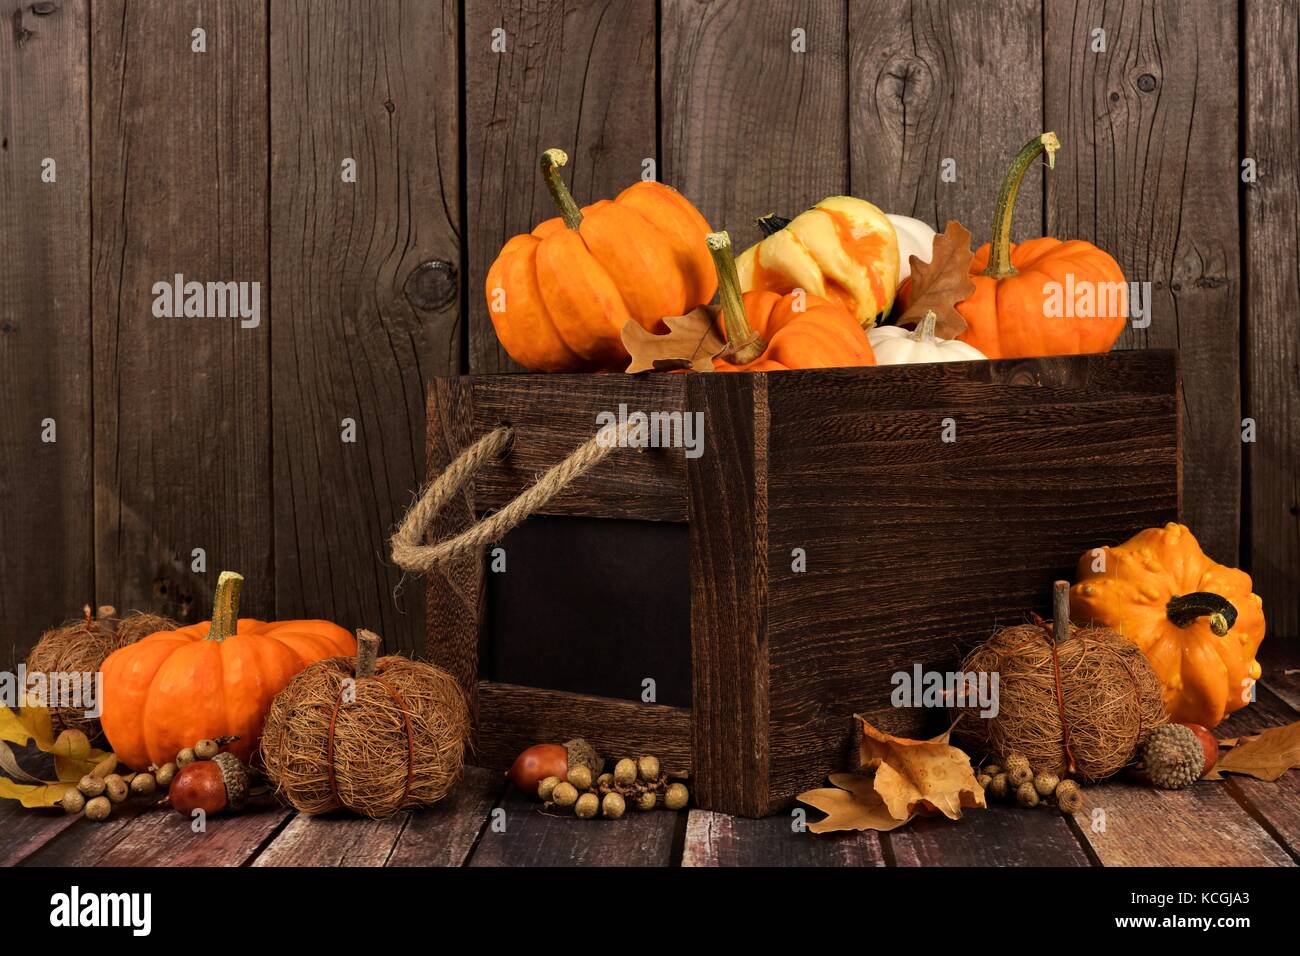 Autumn arrangement with wooden crate of pumpkins and gourds against a rustic wood background Stock Photo